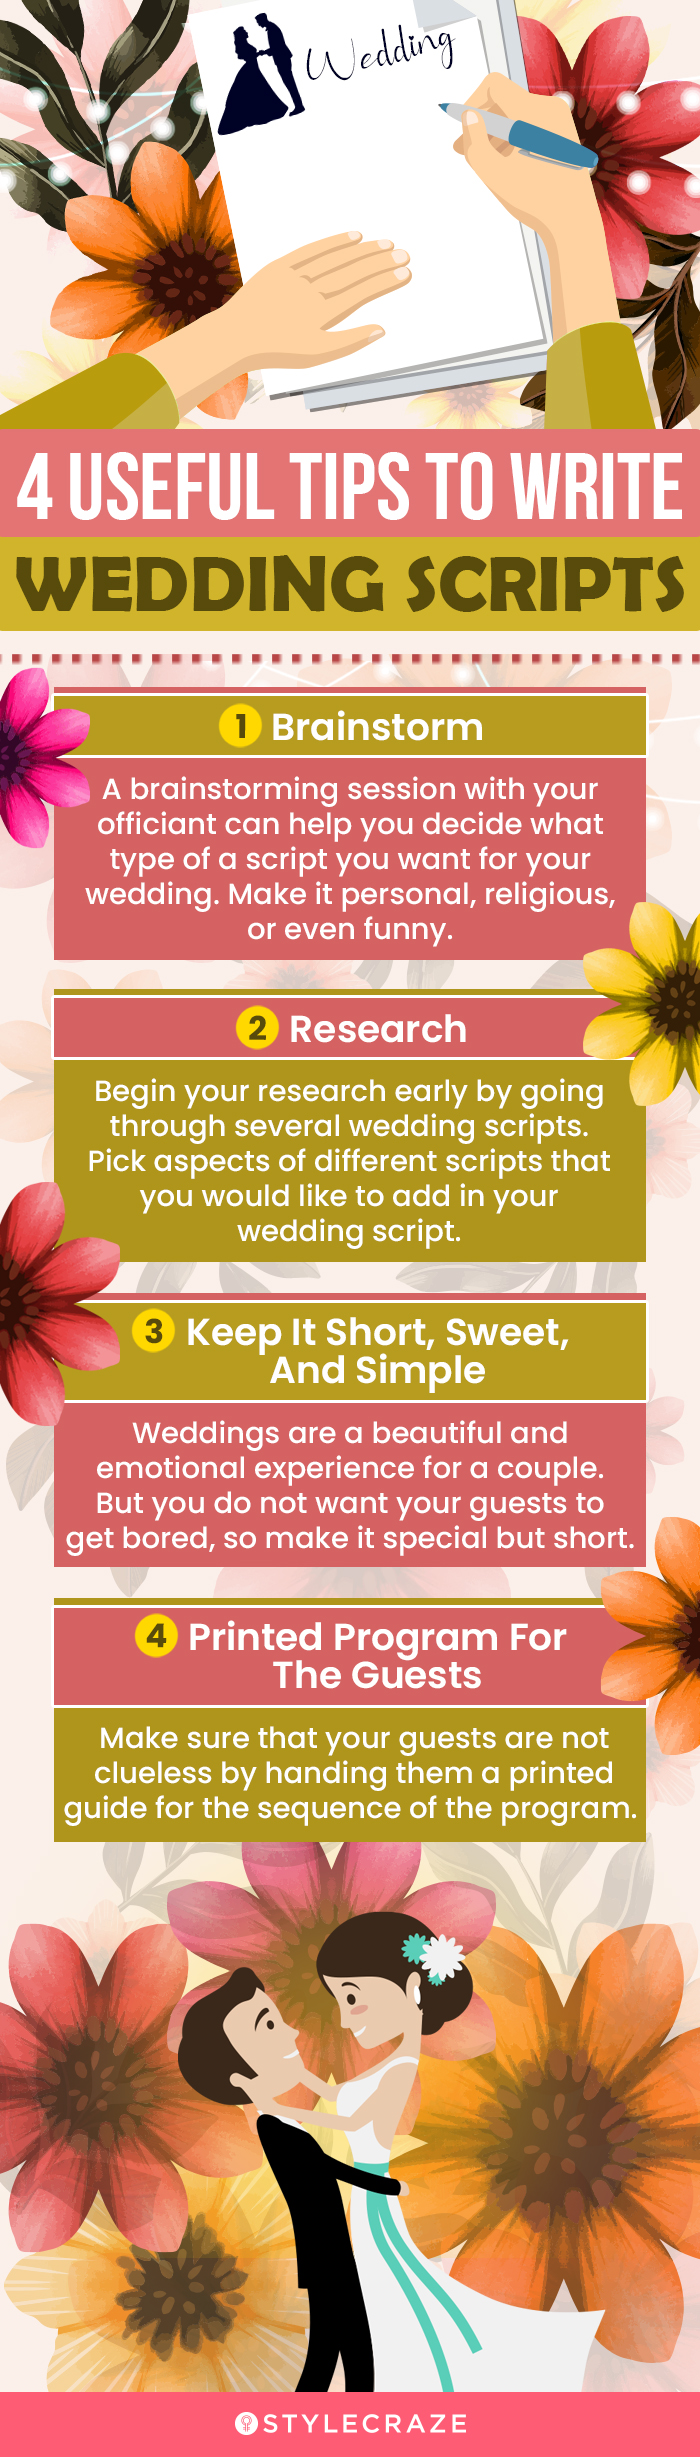 4 useful tips to write wedding scripts (infographic)